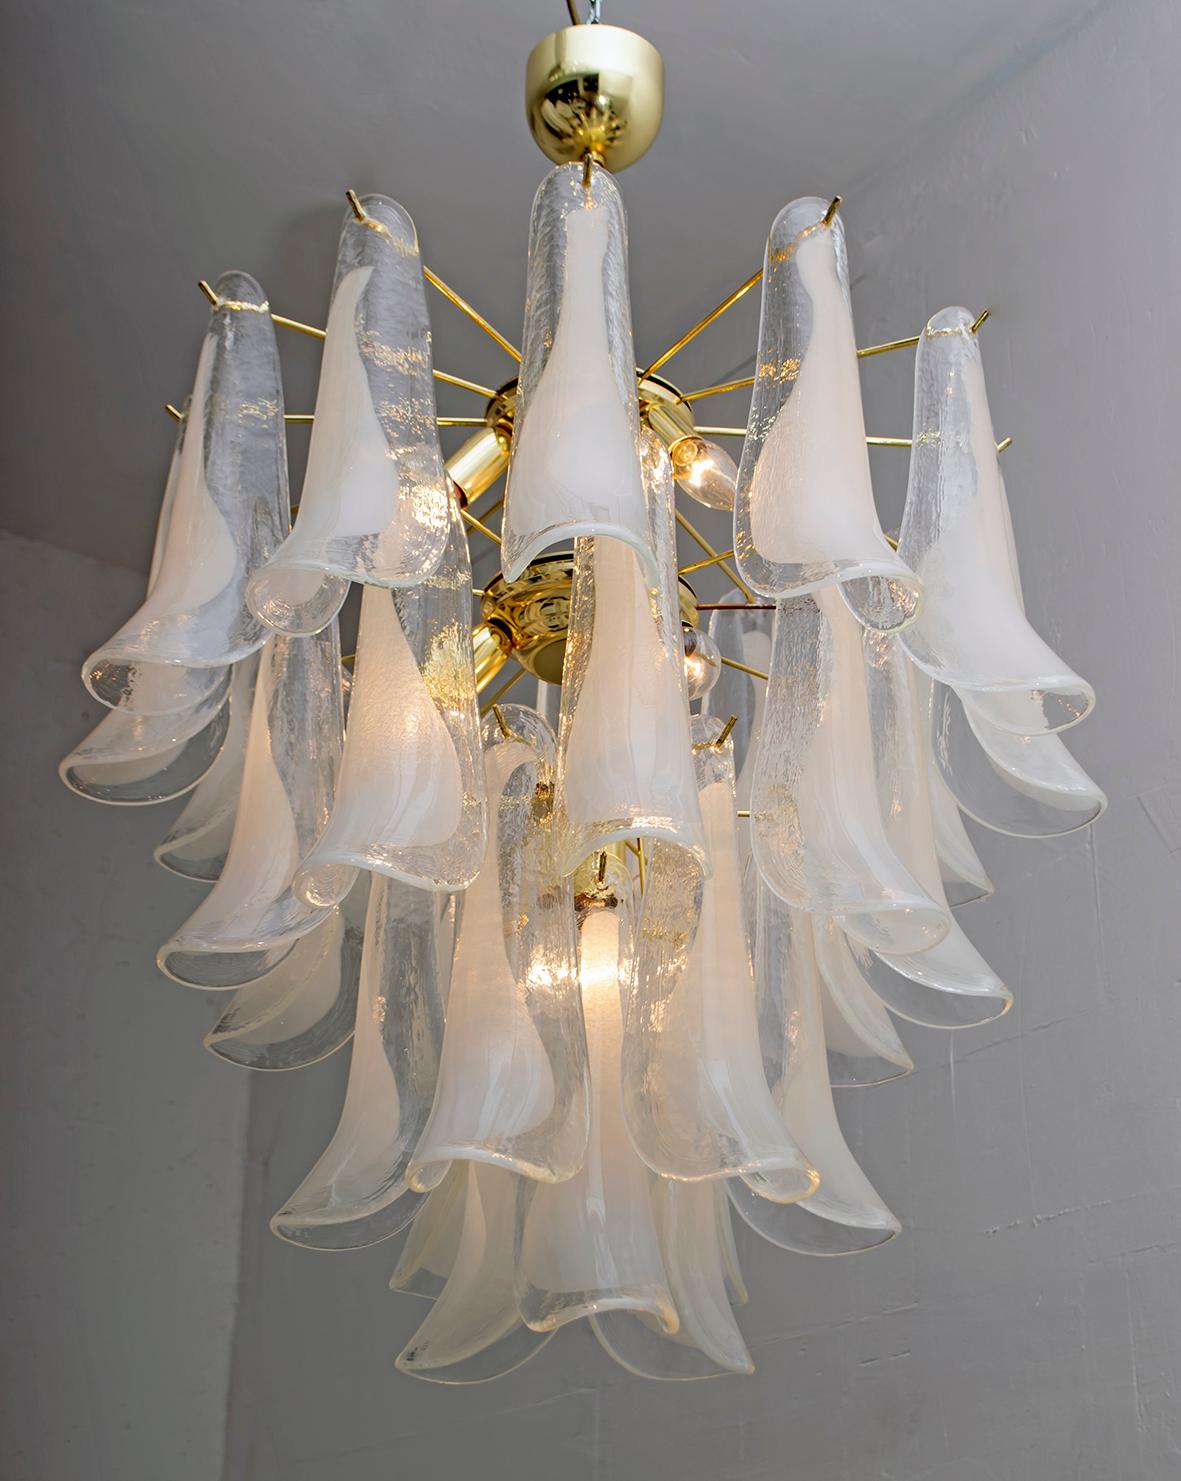 A very elegant chandelier, with glass elements called 